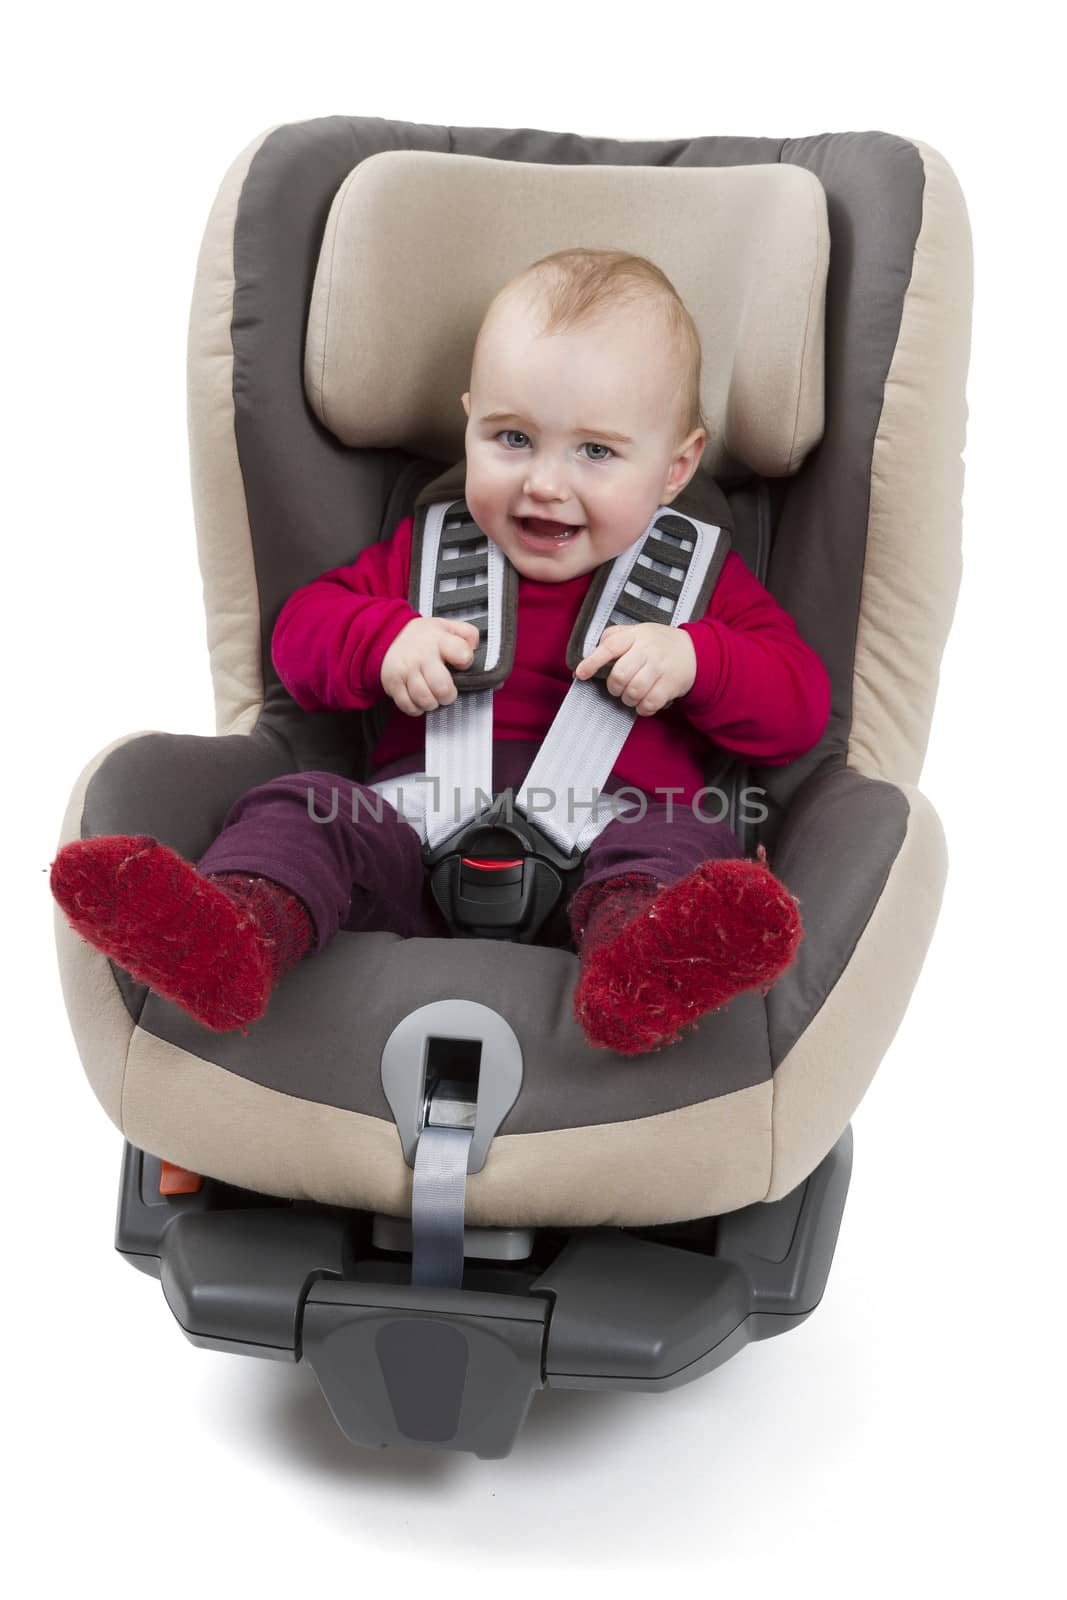 booster seat for a car in light background. studio shot with kid